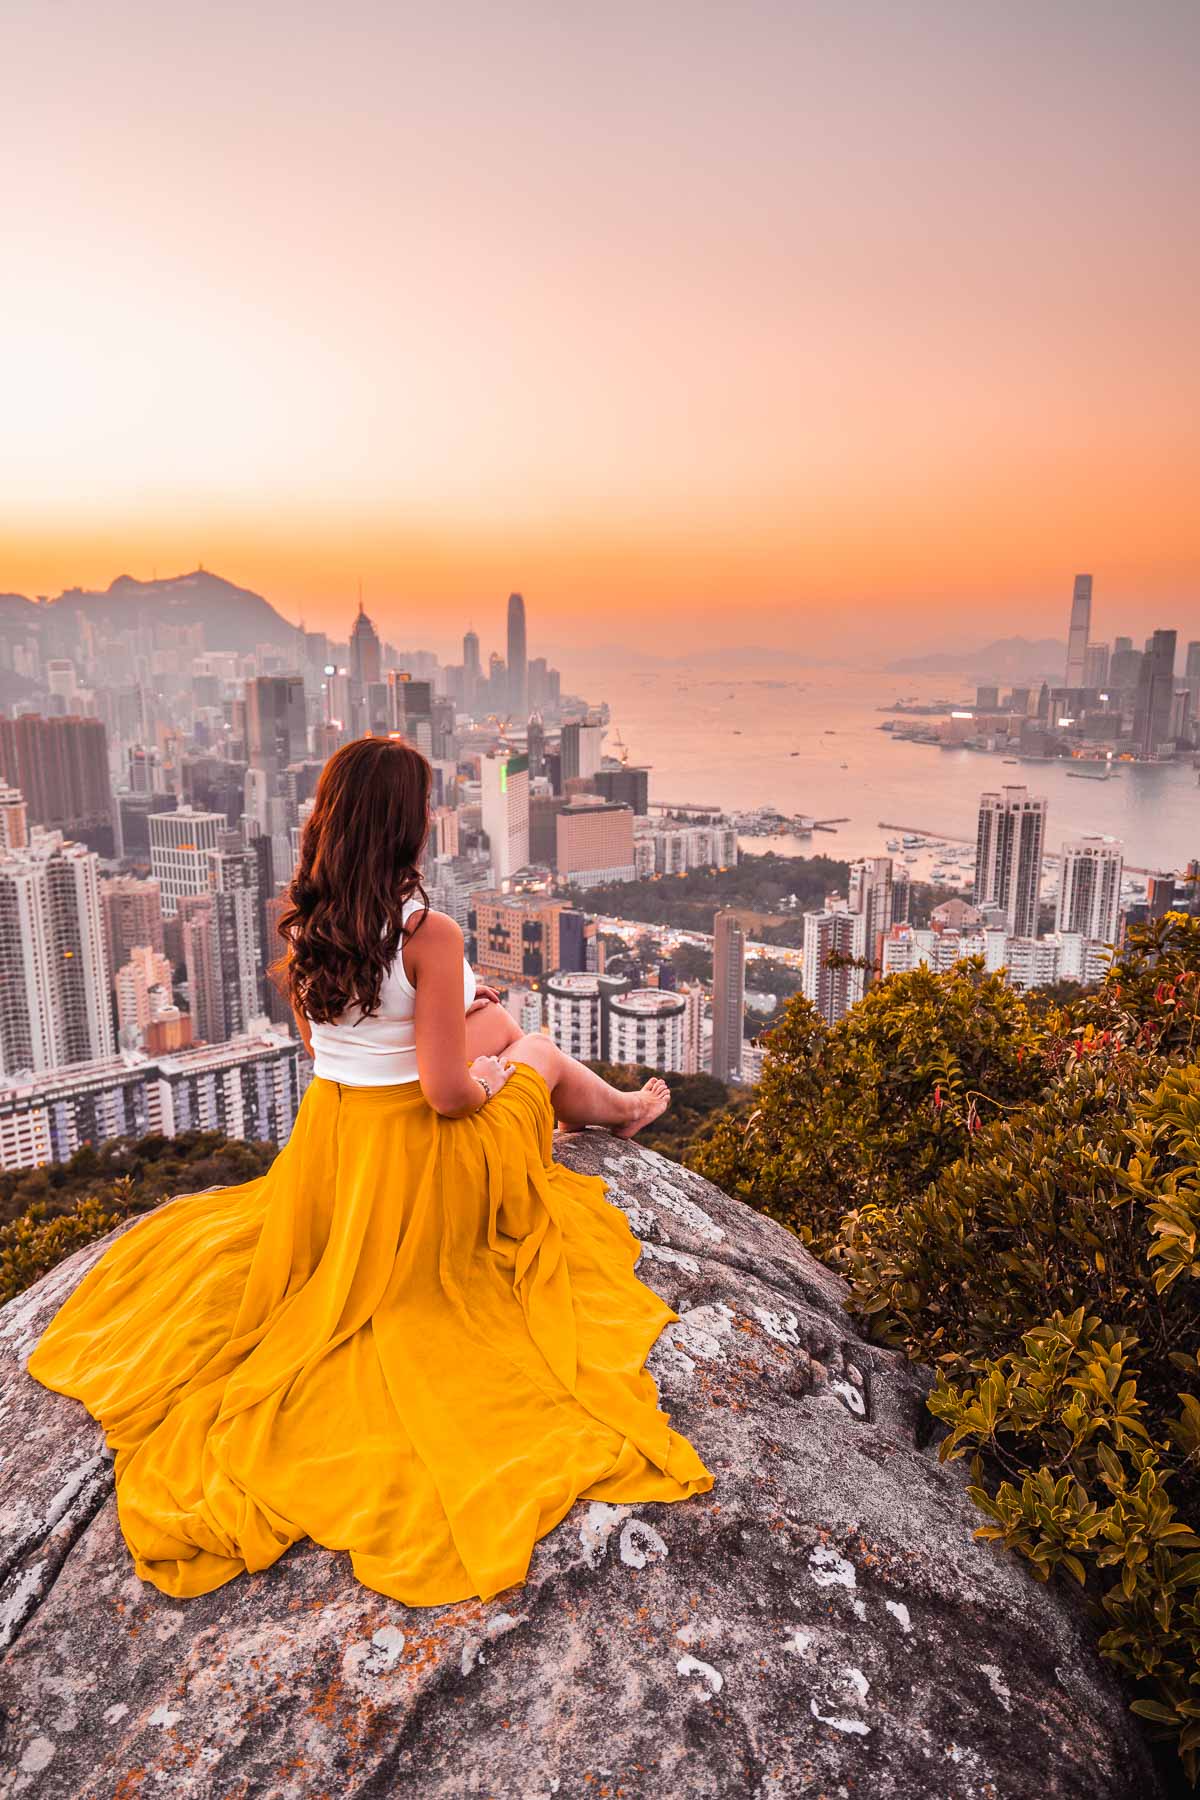 Girl in a yellow skirt sitting on a rock, watching the sunset from Braemer Hill, Hong Kong